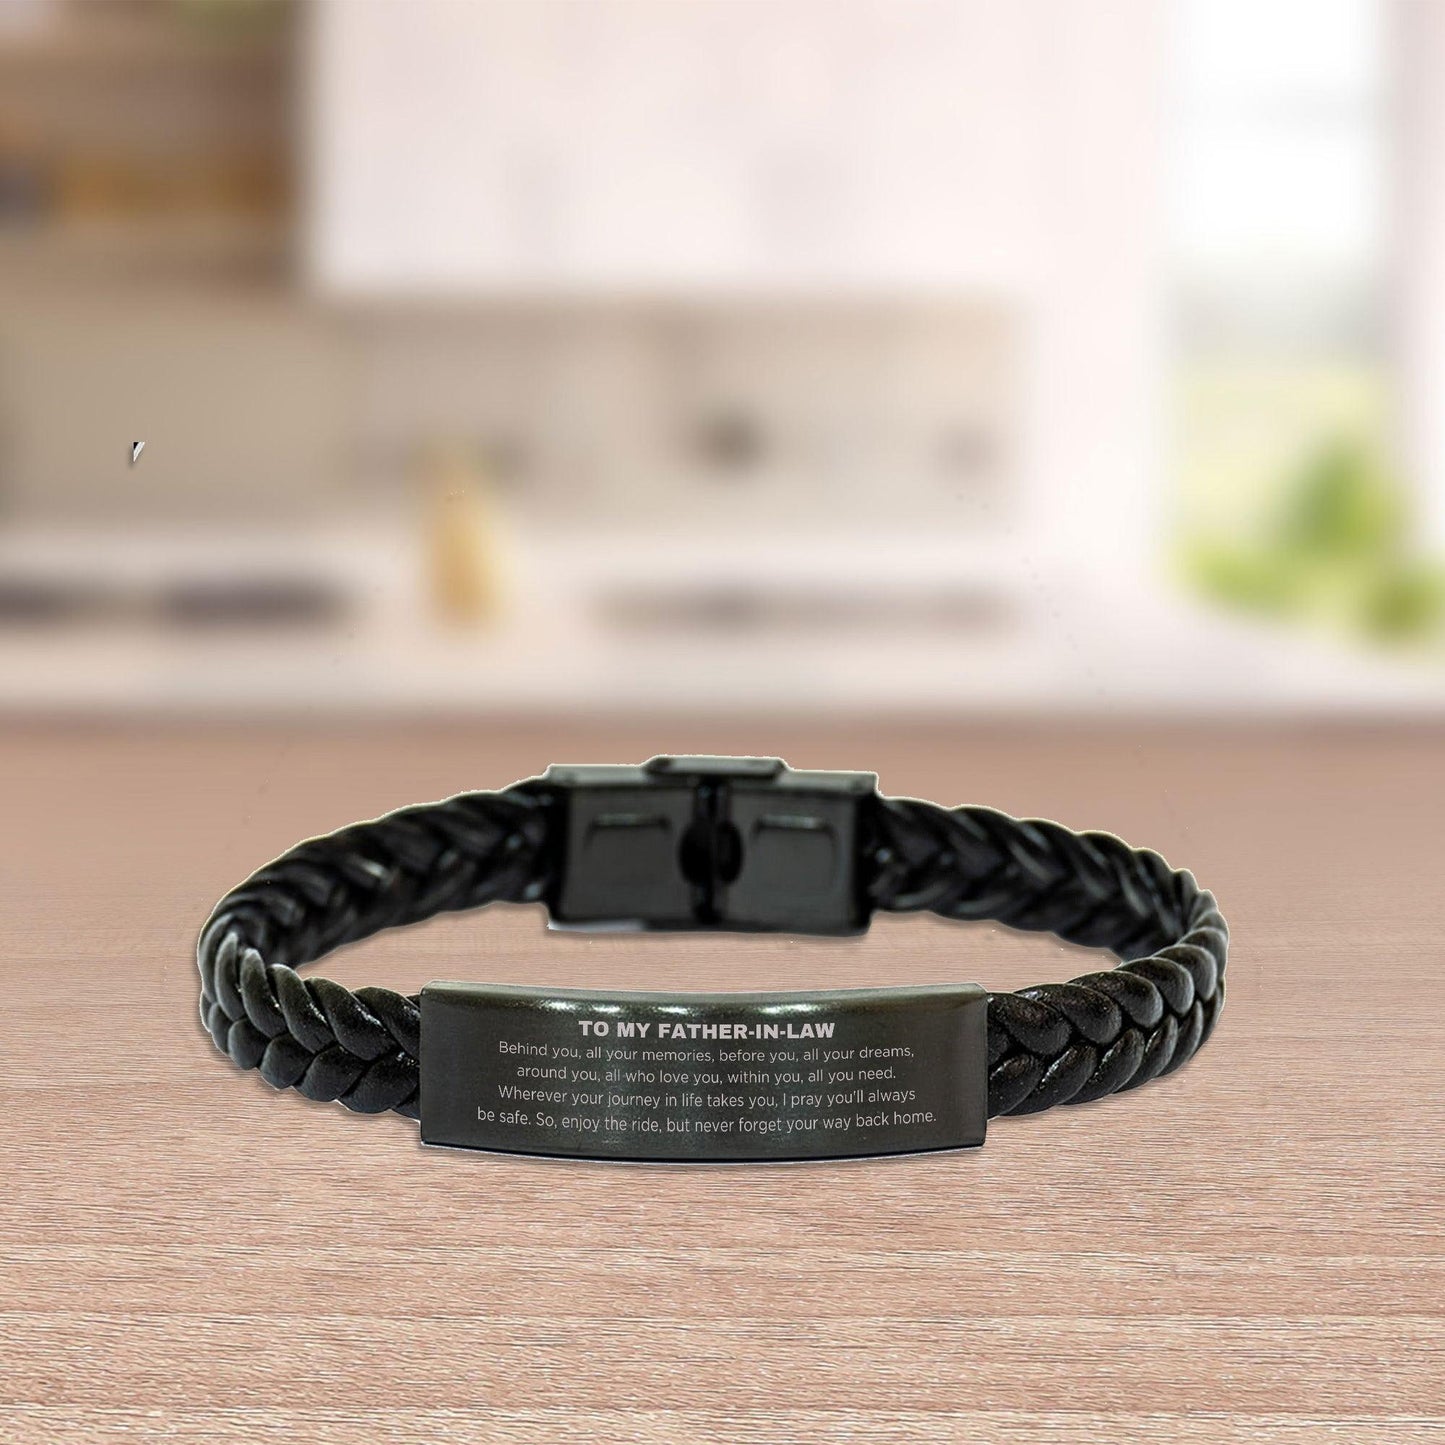 Inspirational Father-In-Law Braided Leather Engraved Stainless Steel Bracelet - Behind you, all your Memories, Before you, all your Dreams - Birthday, Christmas Holiday Gifts - Mallard Moon Gift Shop